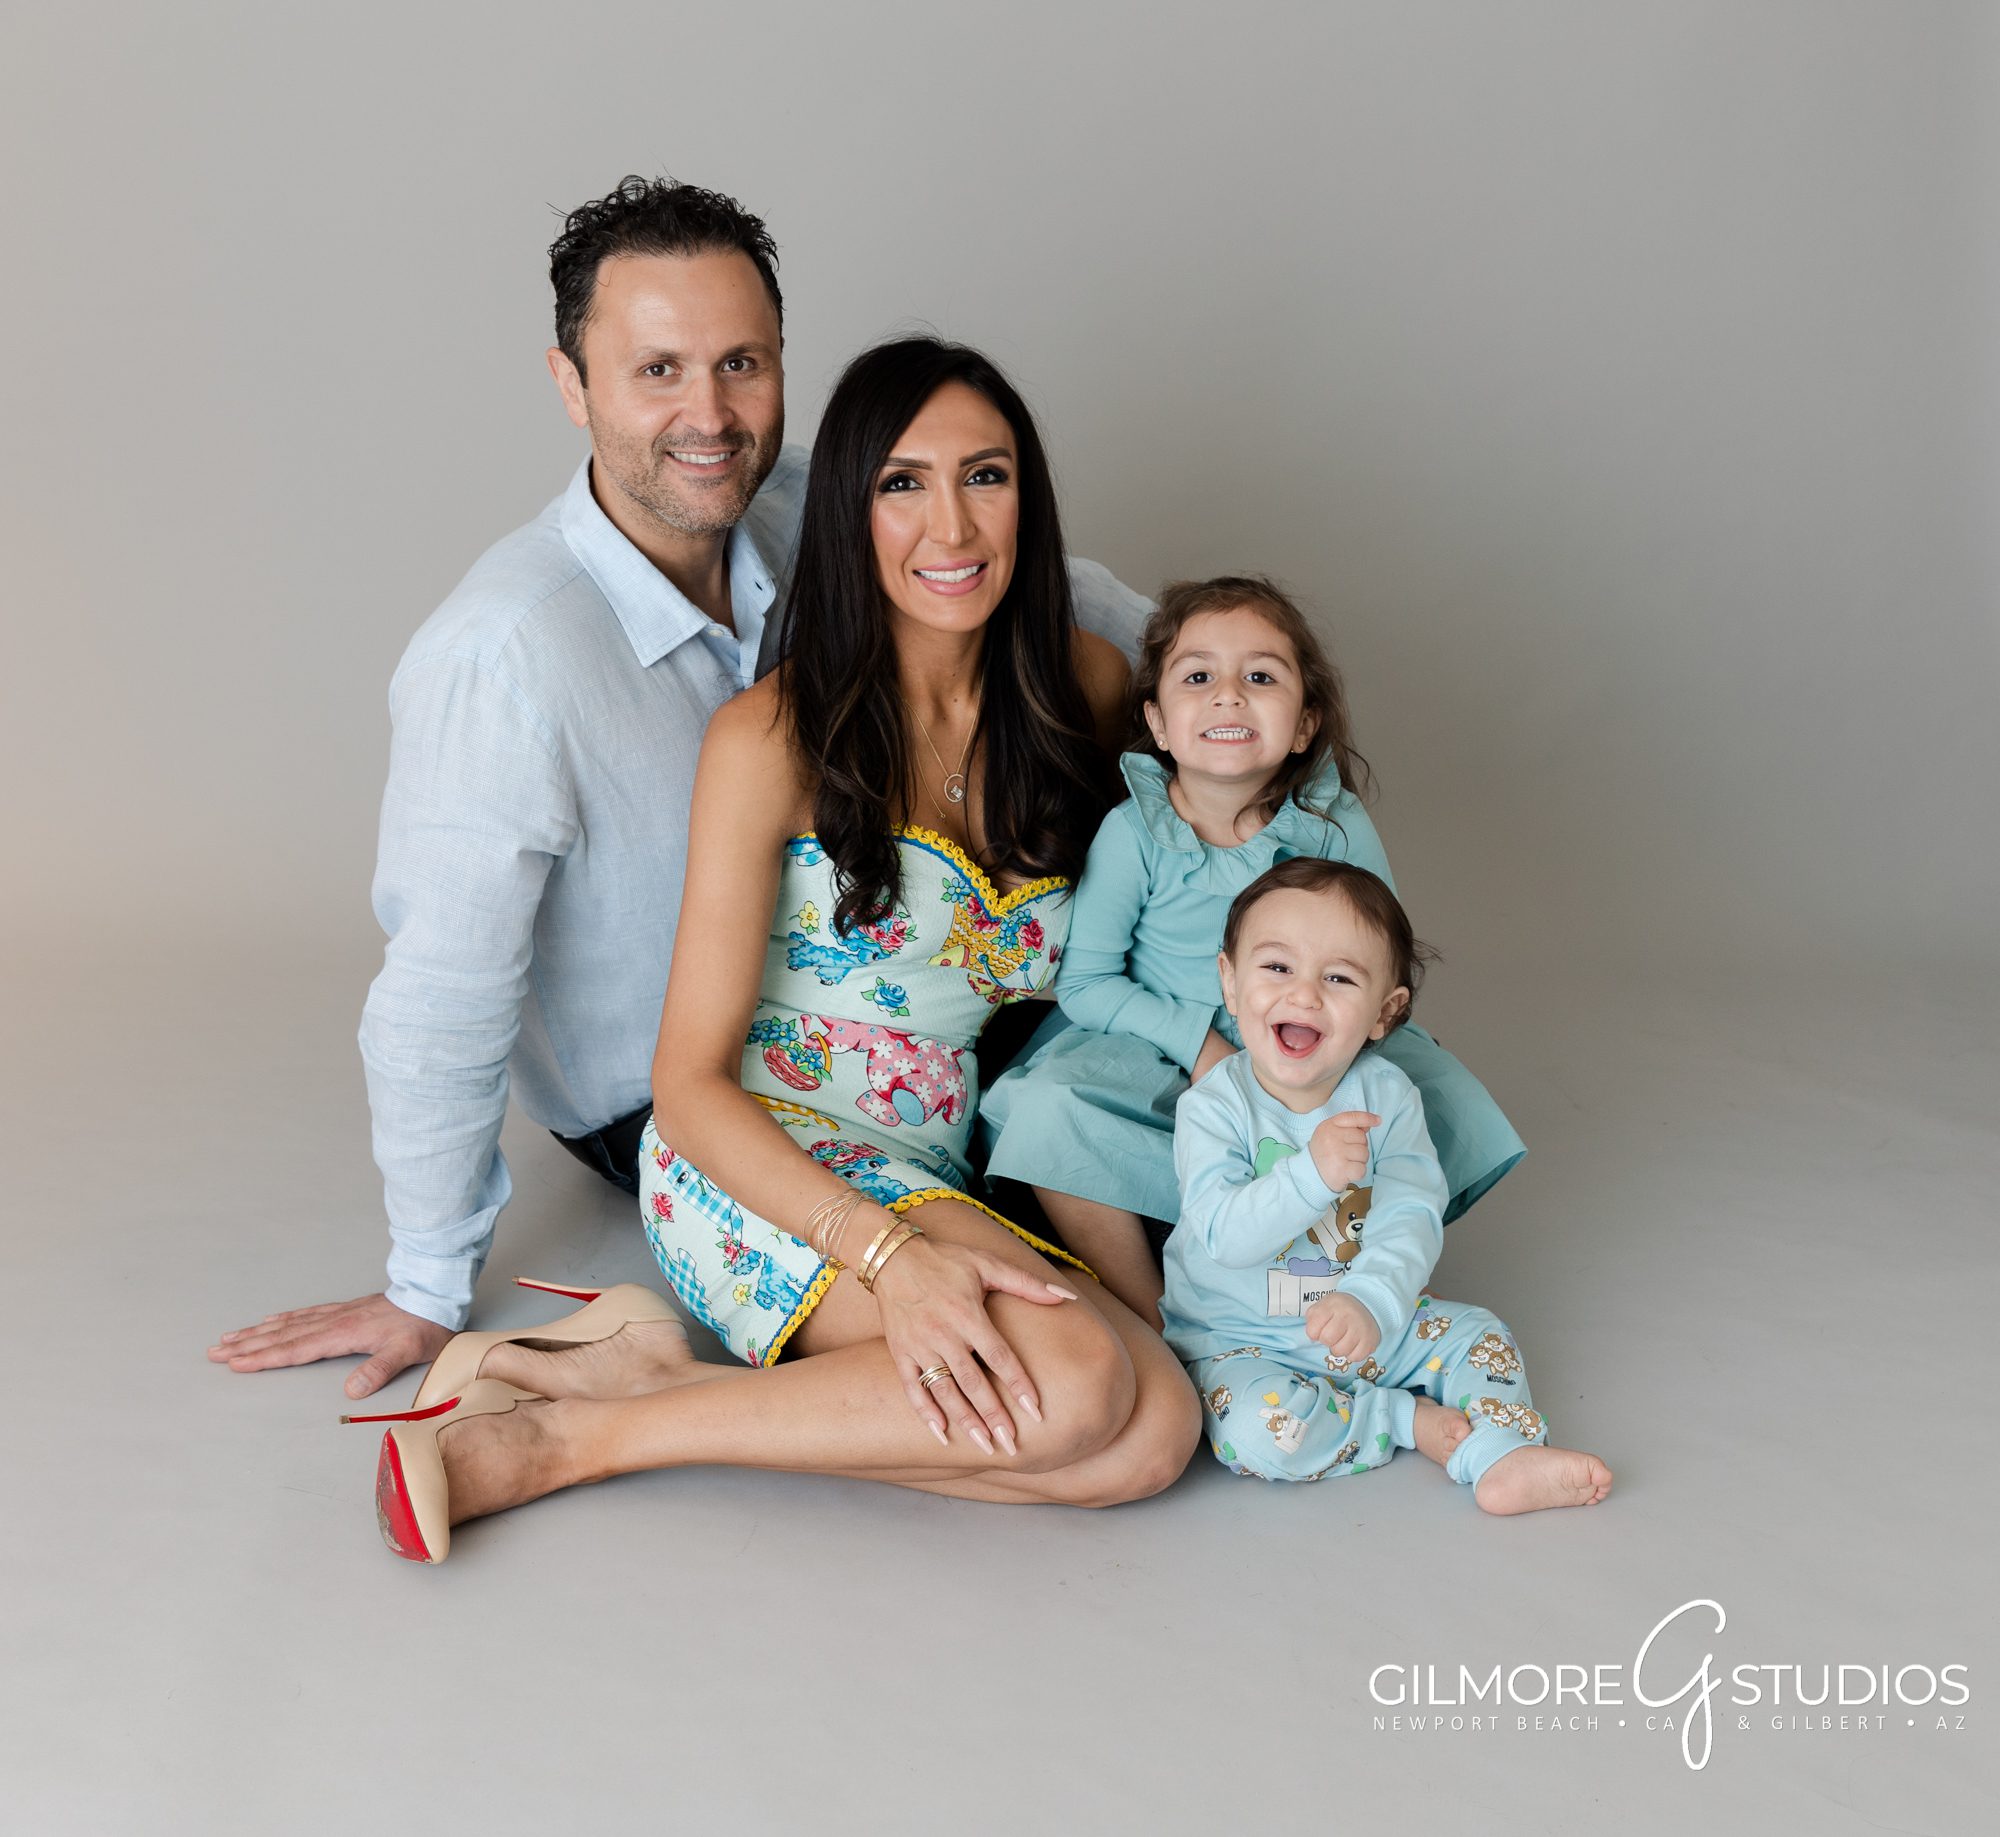 family studio photographer, grey background, seamless, photo studio in east valley AZ, Newport Beach portrait studio, Jennifer Gilmore, Gilmore Studios, family with one year old, siblings, mom and dad, brother and sister